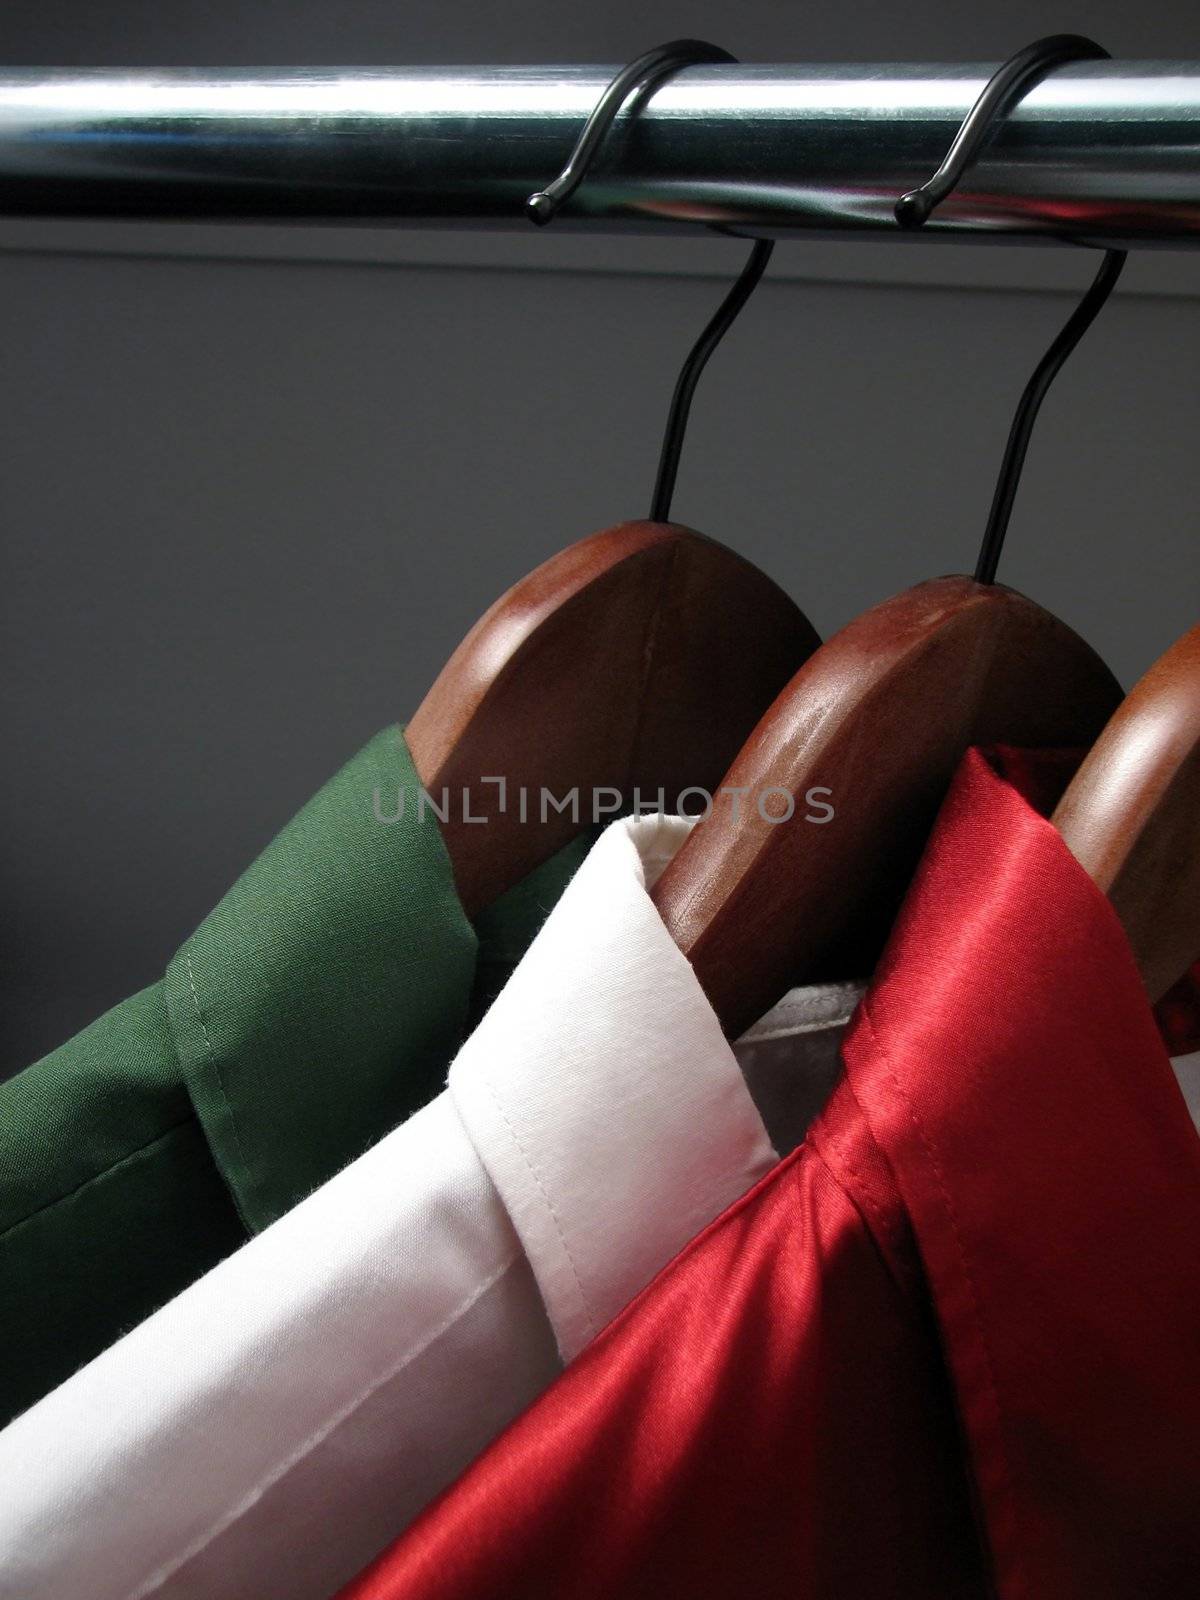 Colors of Italian flag: green, white and red shirts on wooden hangers in a closet.